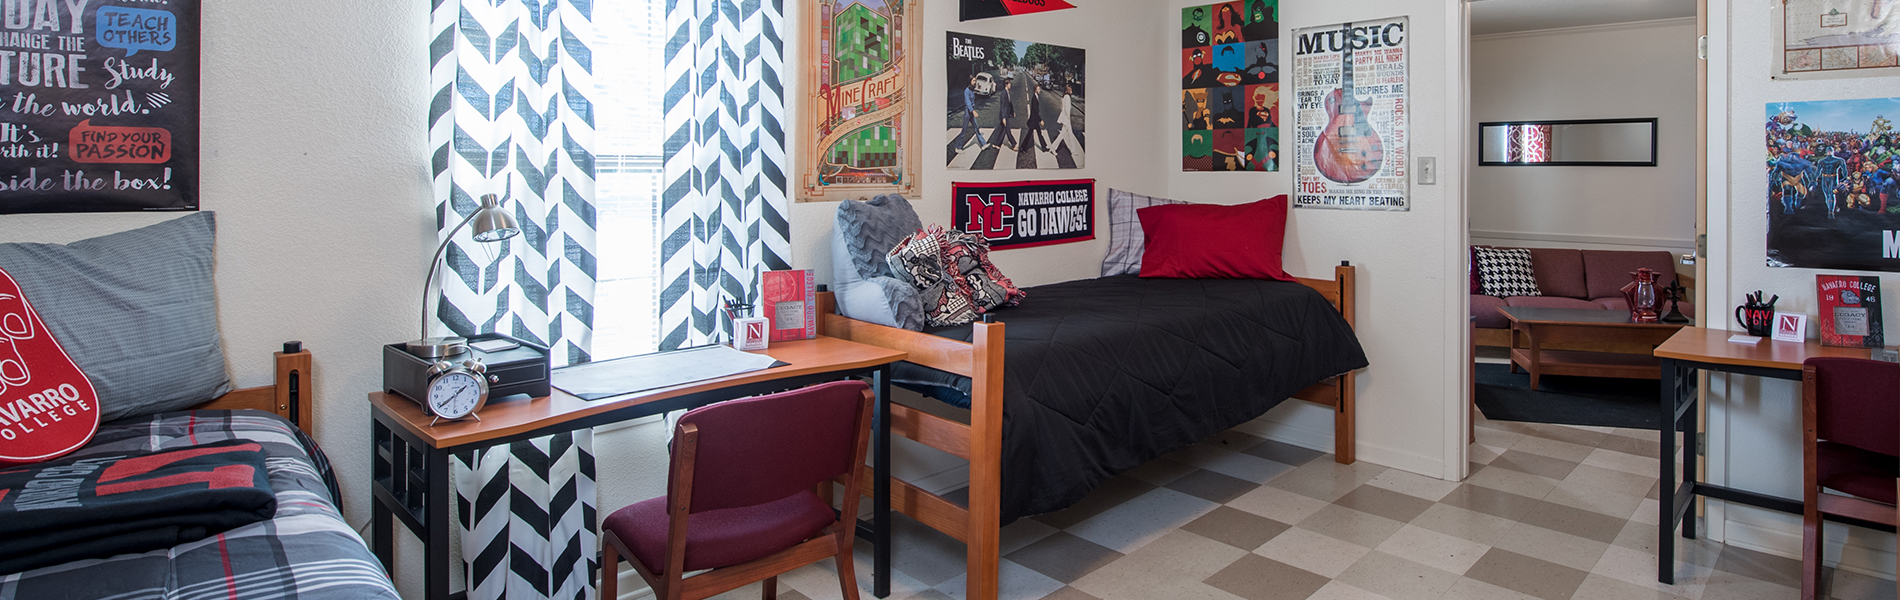 How do you keep things safe in dorms?